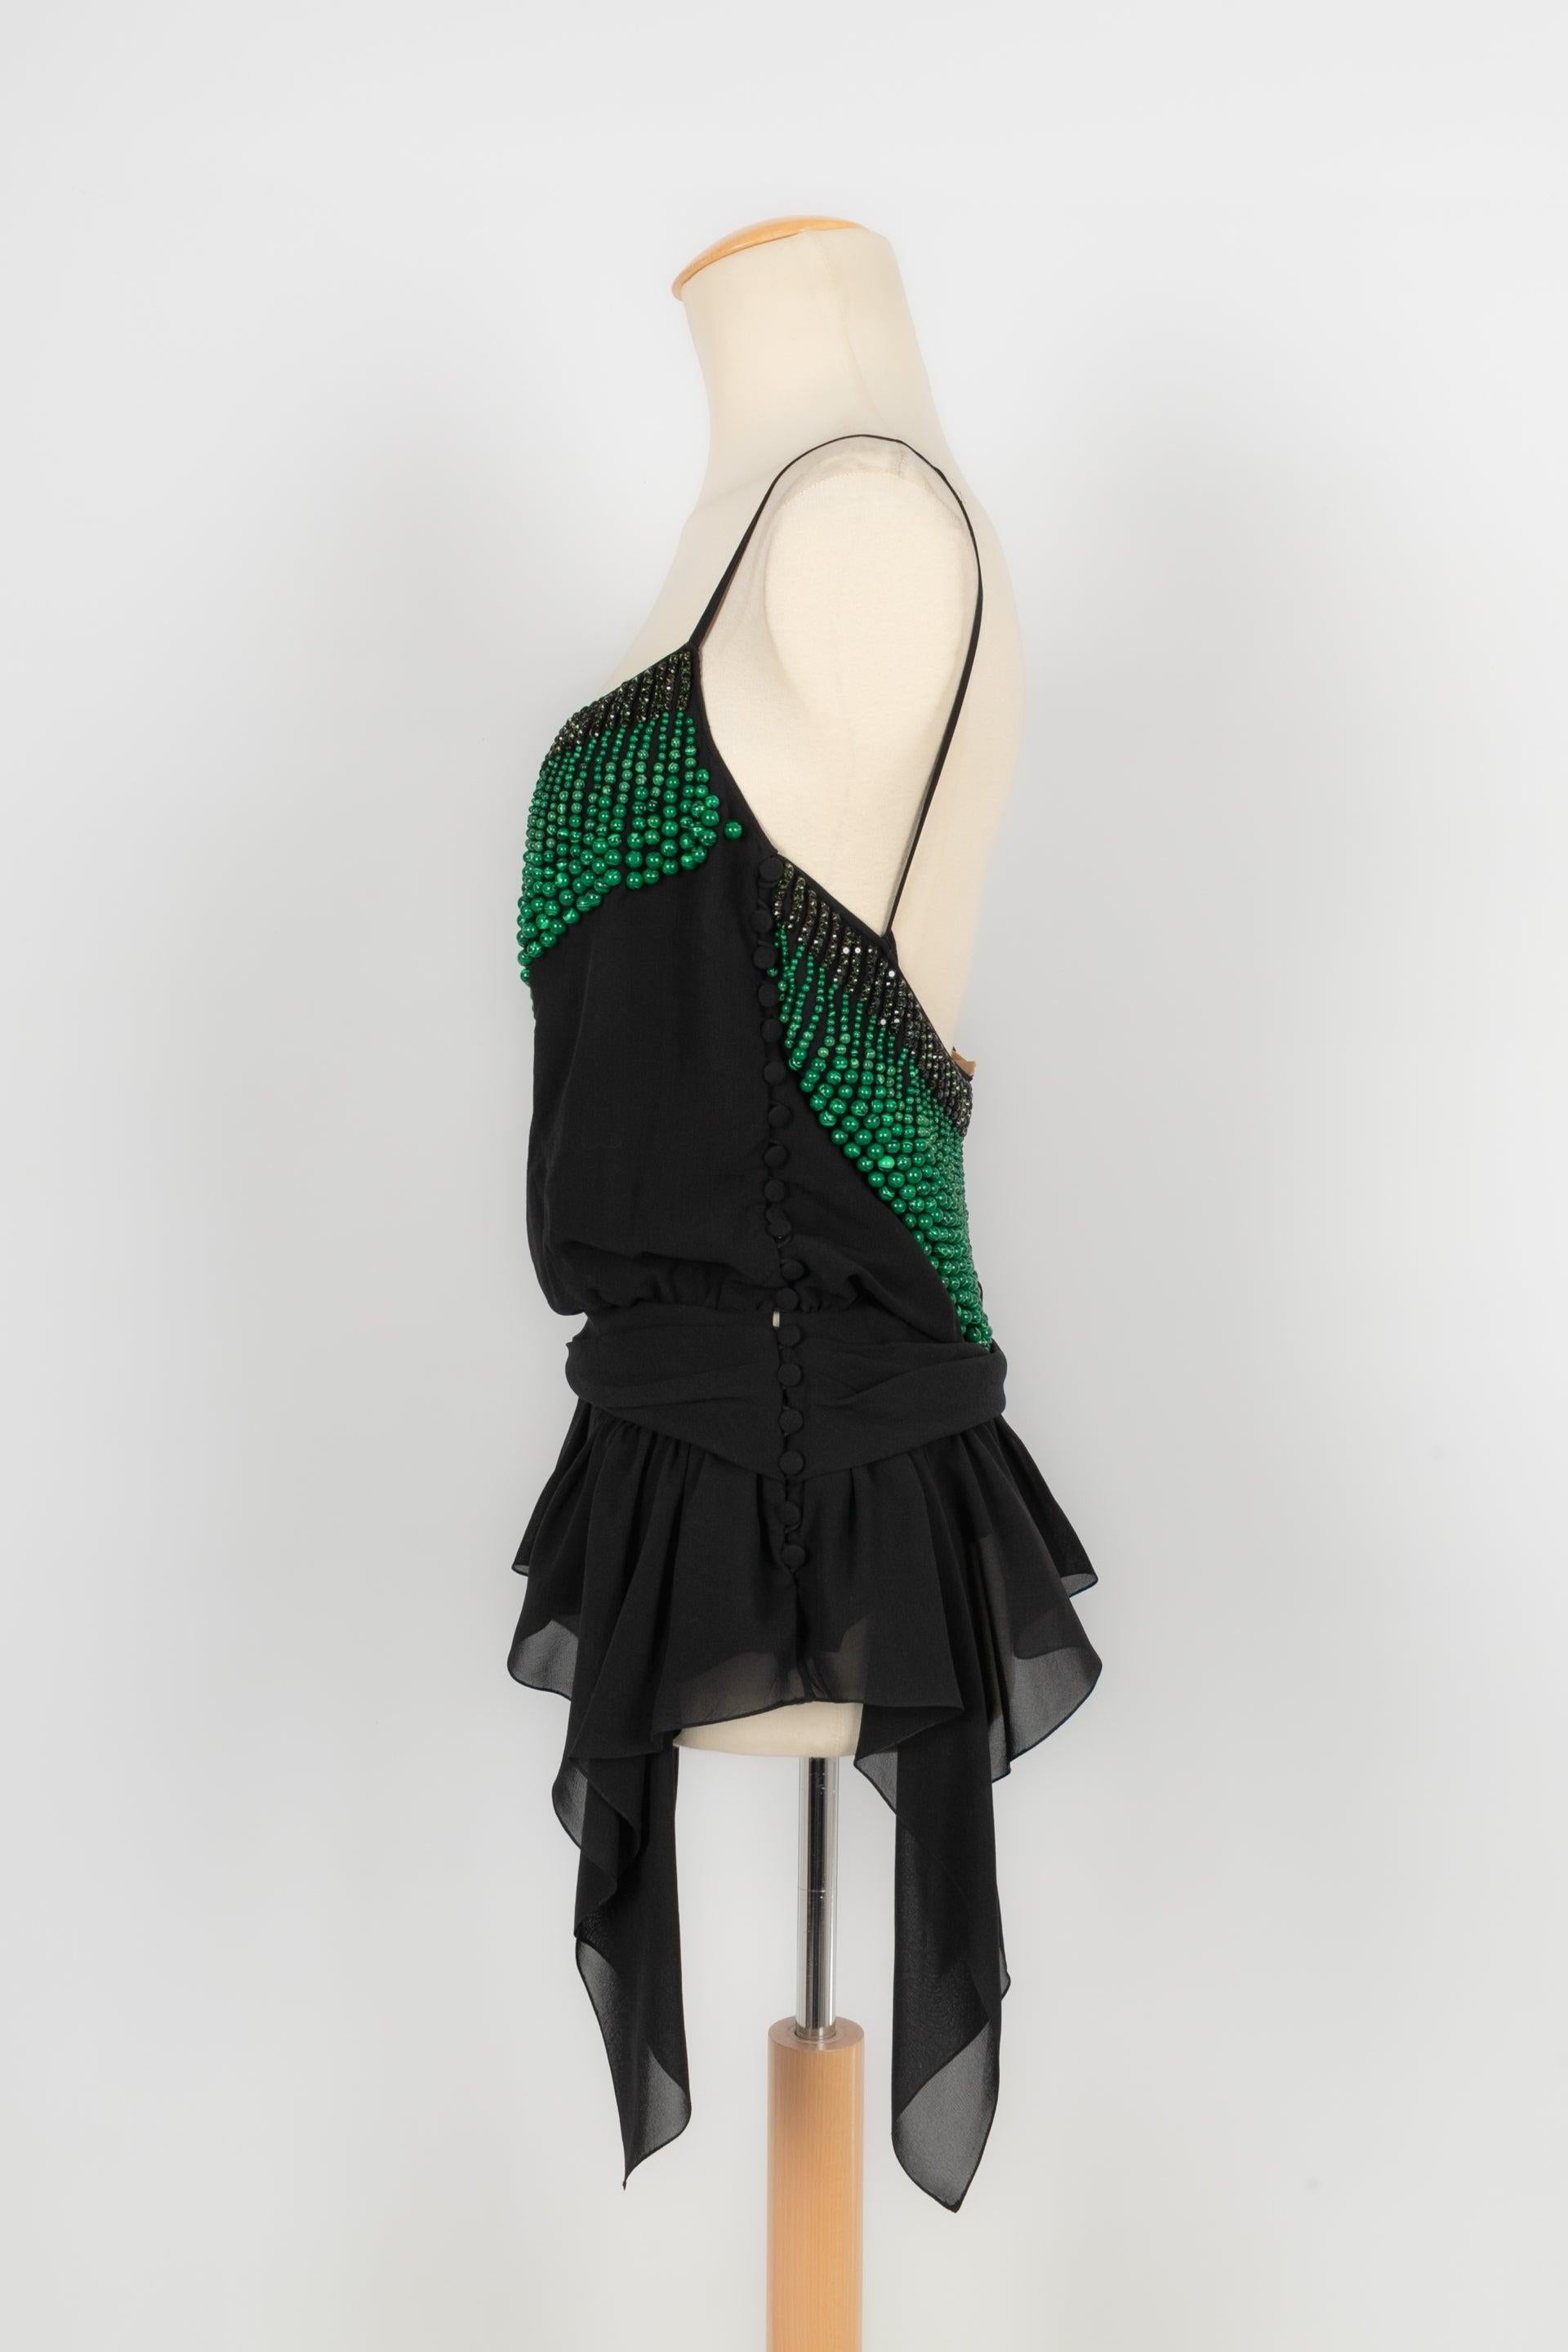 Galliano - Black top ornamented with pearls and green rhinestones. No size indicated, it fits a 36FR/38FR.

Additional information:
Condition: Very good condition
Dimensions: Chest: 44 cm
Length: 54 cm

Seller reference: FH39